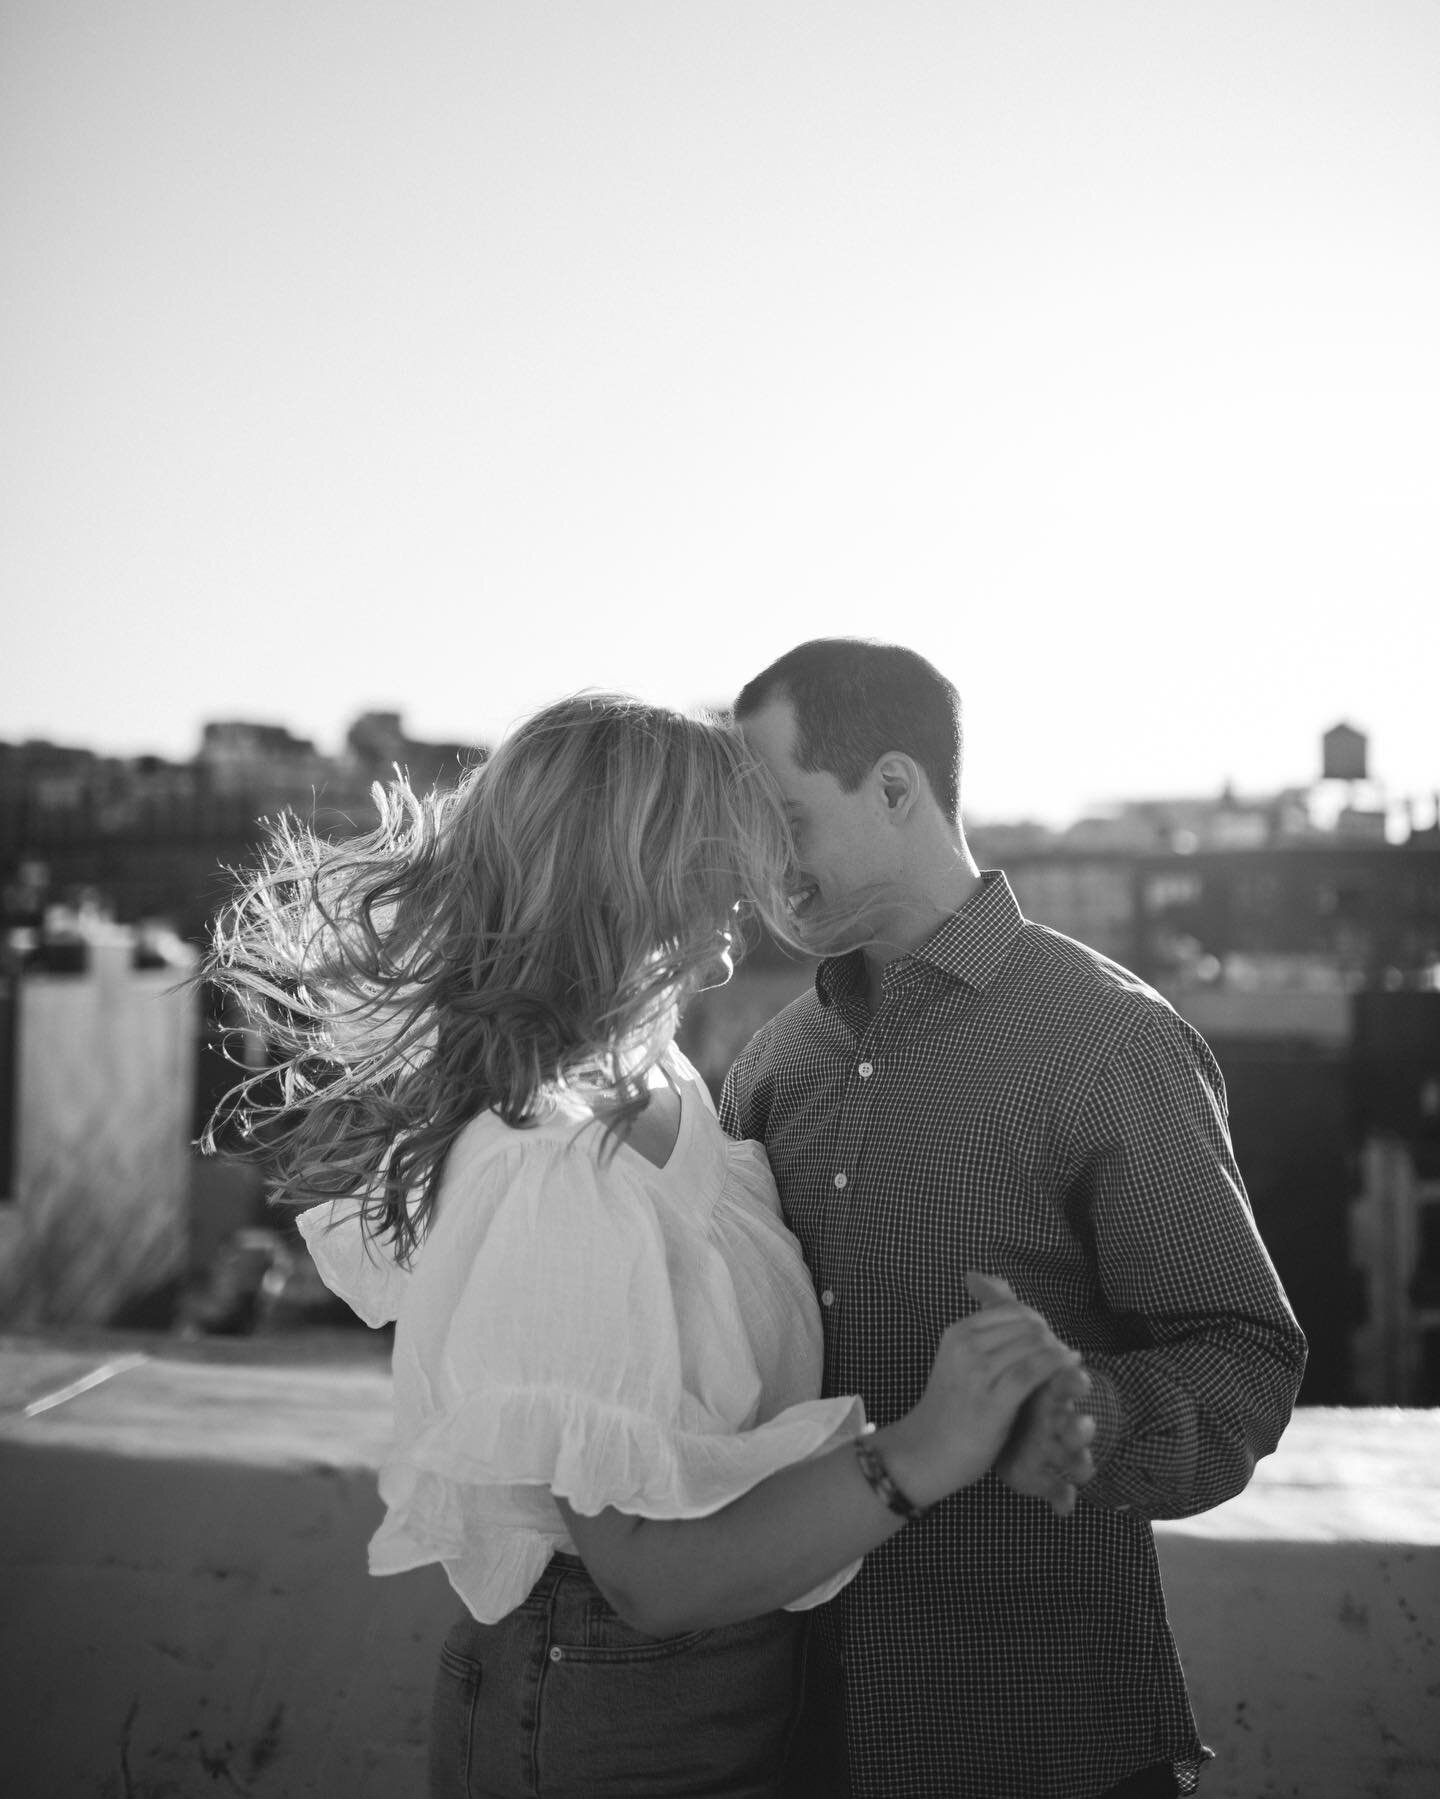 Have about 280 nyc photos I want to share but this rooftop b&amp;w with the wind blown hair just speaks to me 🤍🖤🤍🖤

Can&rsquo;t wait to celebrate these 2 in October!!